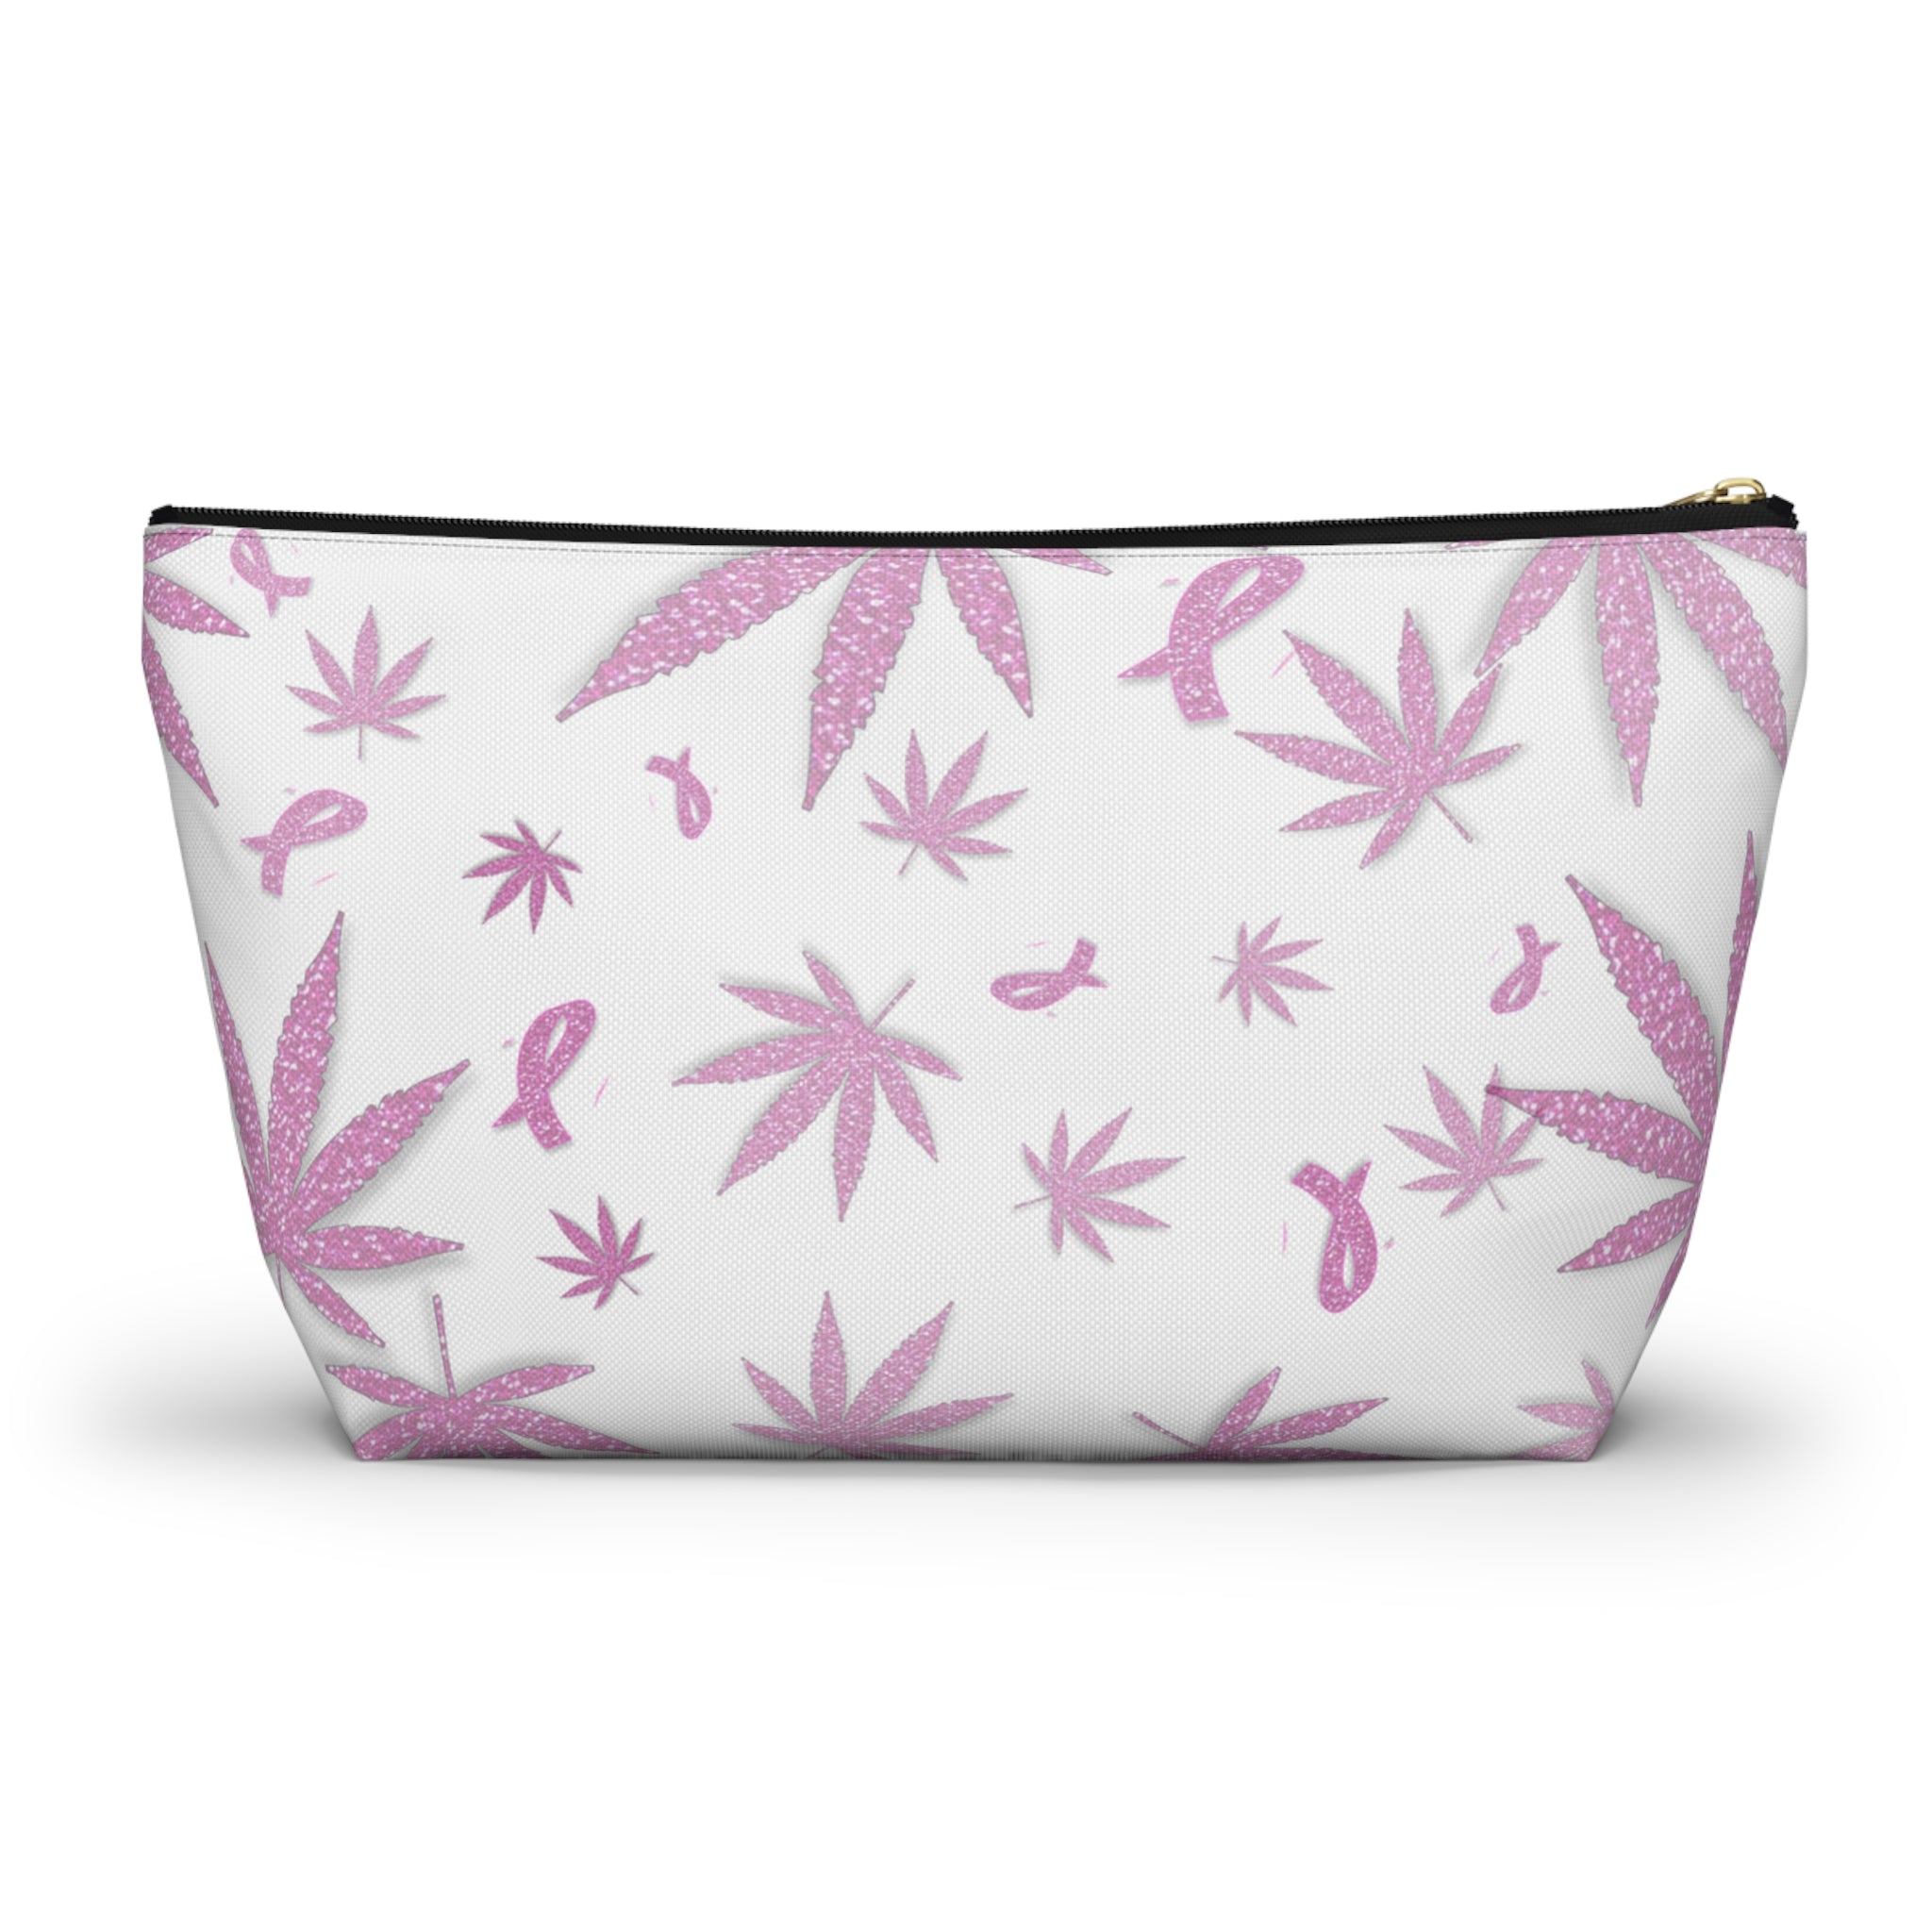 Fight Like A Badass Breast Cancer Awareness And Support Cannabis Themed Stash Bag Makeup Bag Accessory Pouch Stoner Gift